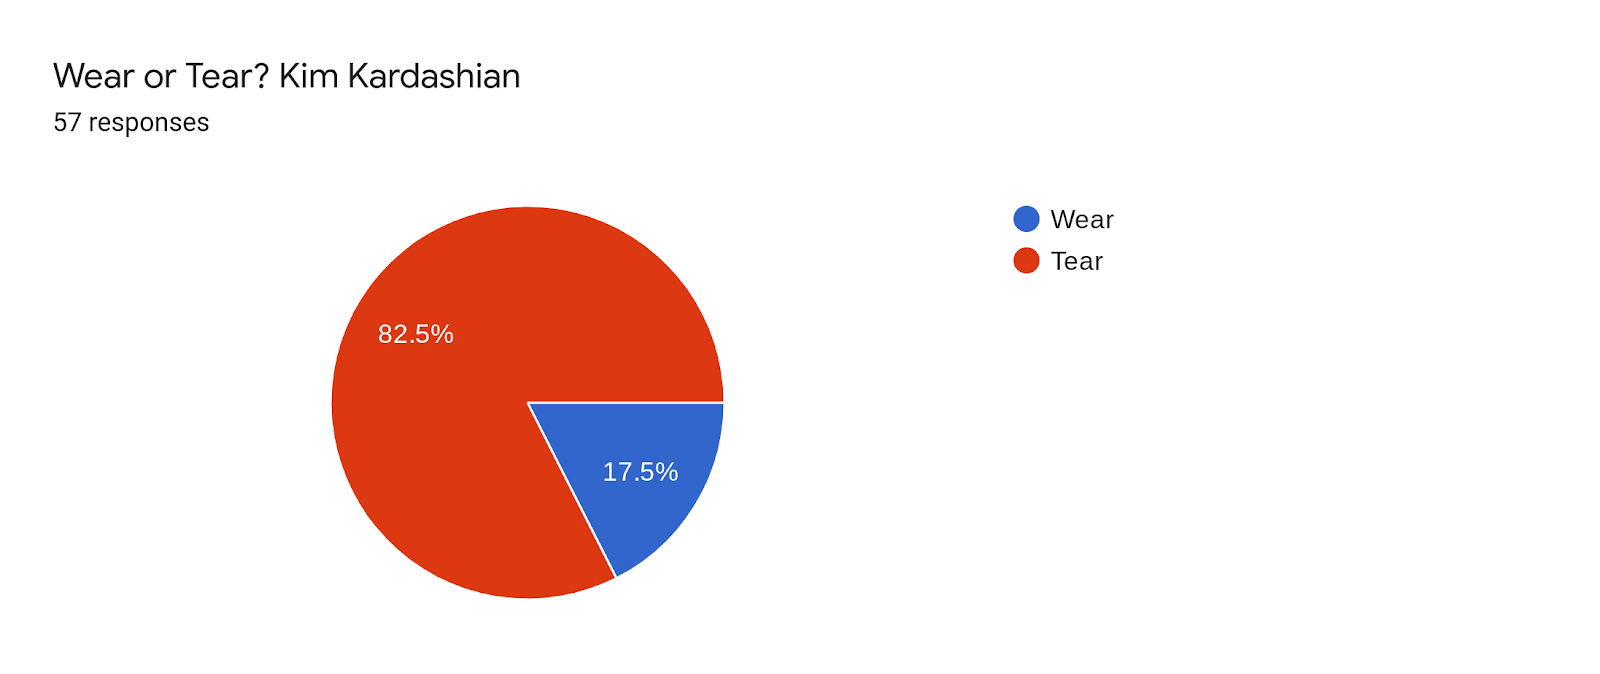 Forms response chart. Question title: Wear or Tear? Kim Kardashian. Number of responses: 57 responses.